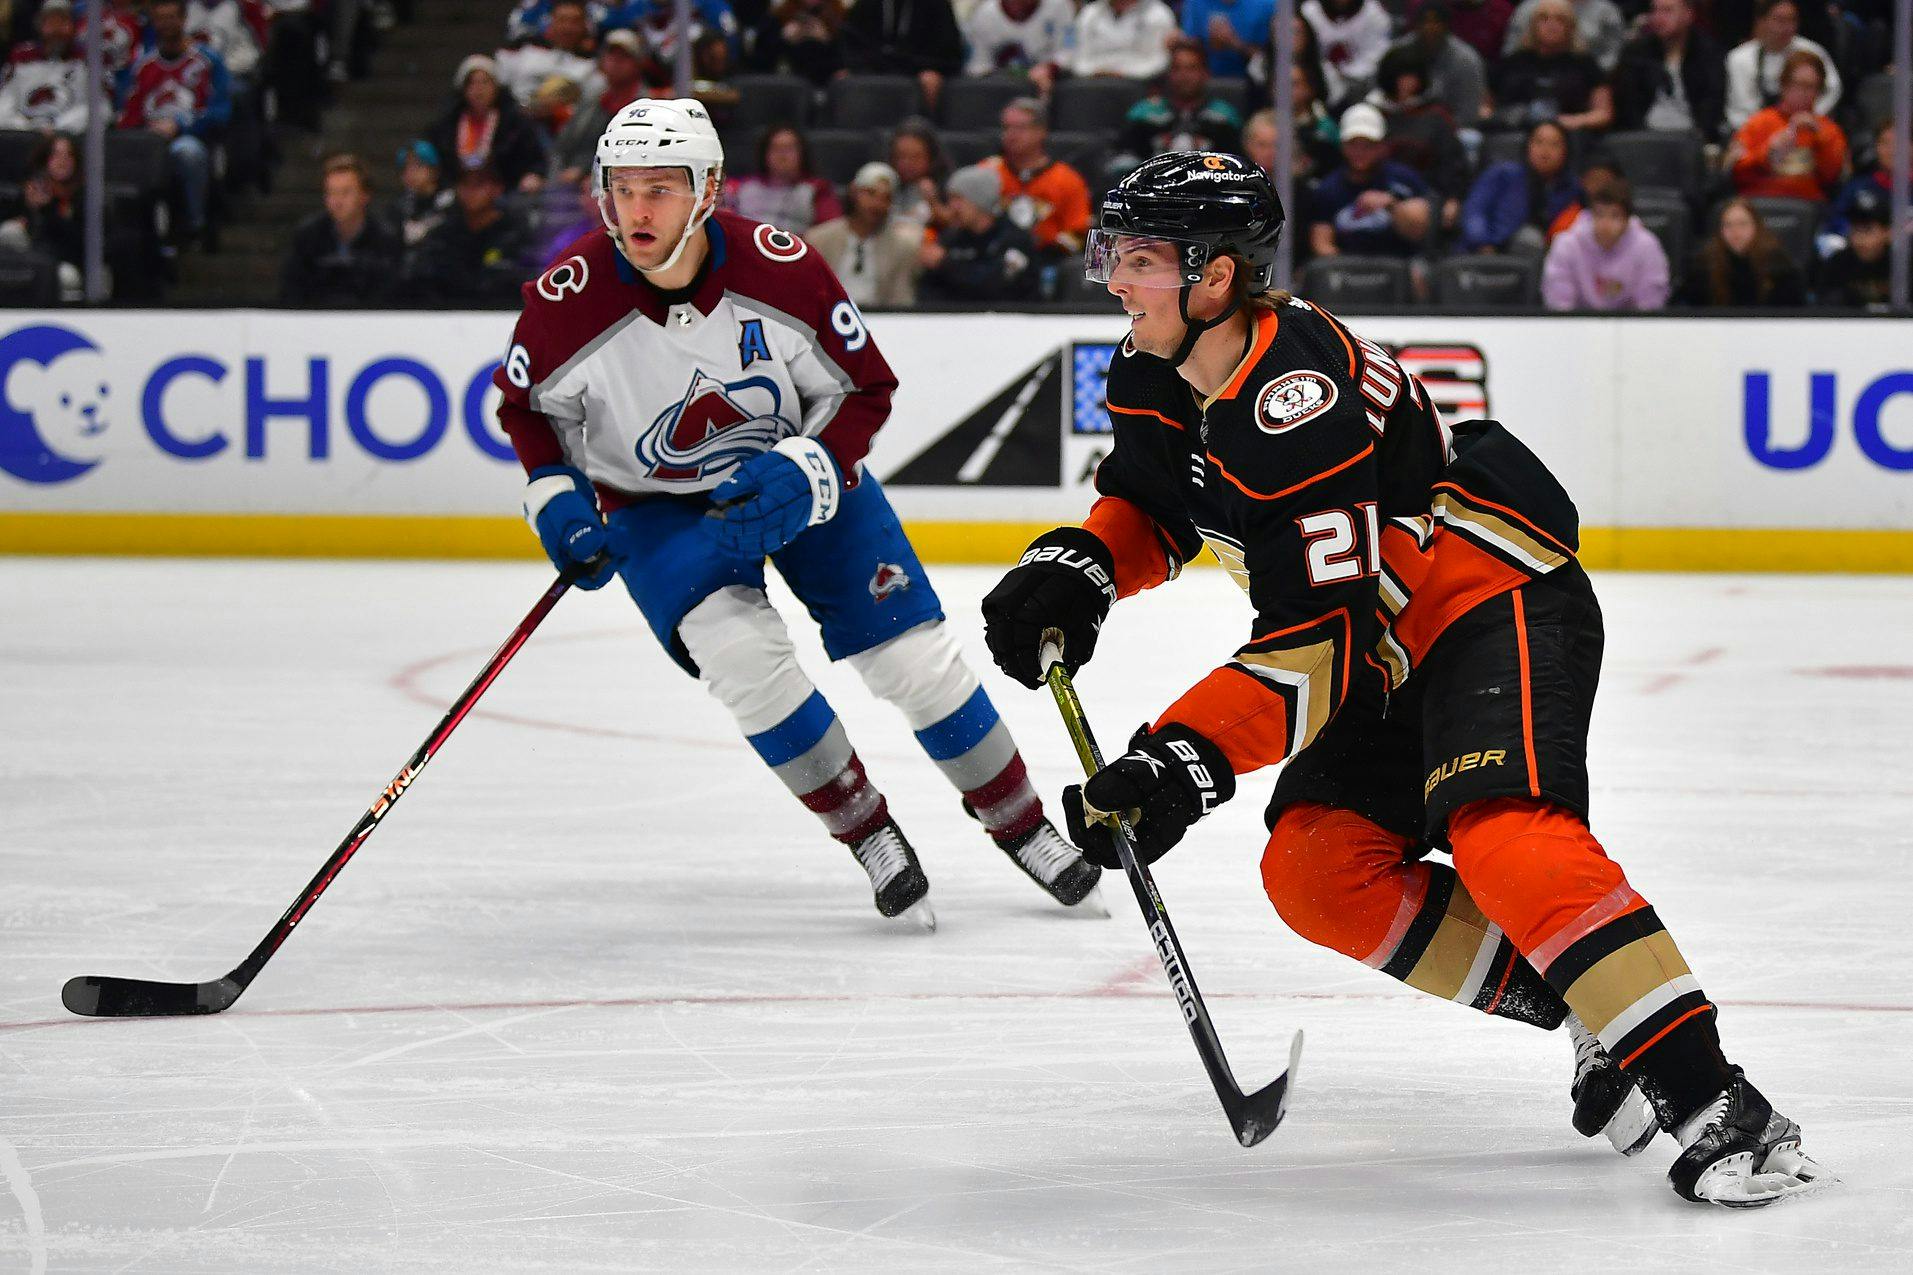 Ducks’ forward Isac Lundestrom tears Achilles, to miss 6 months